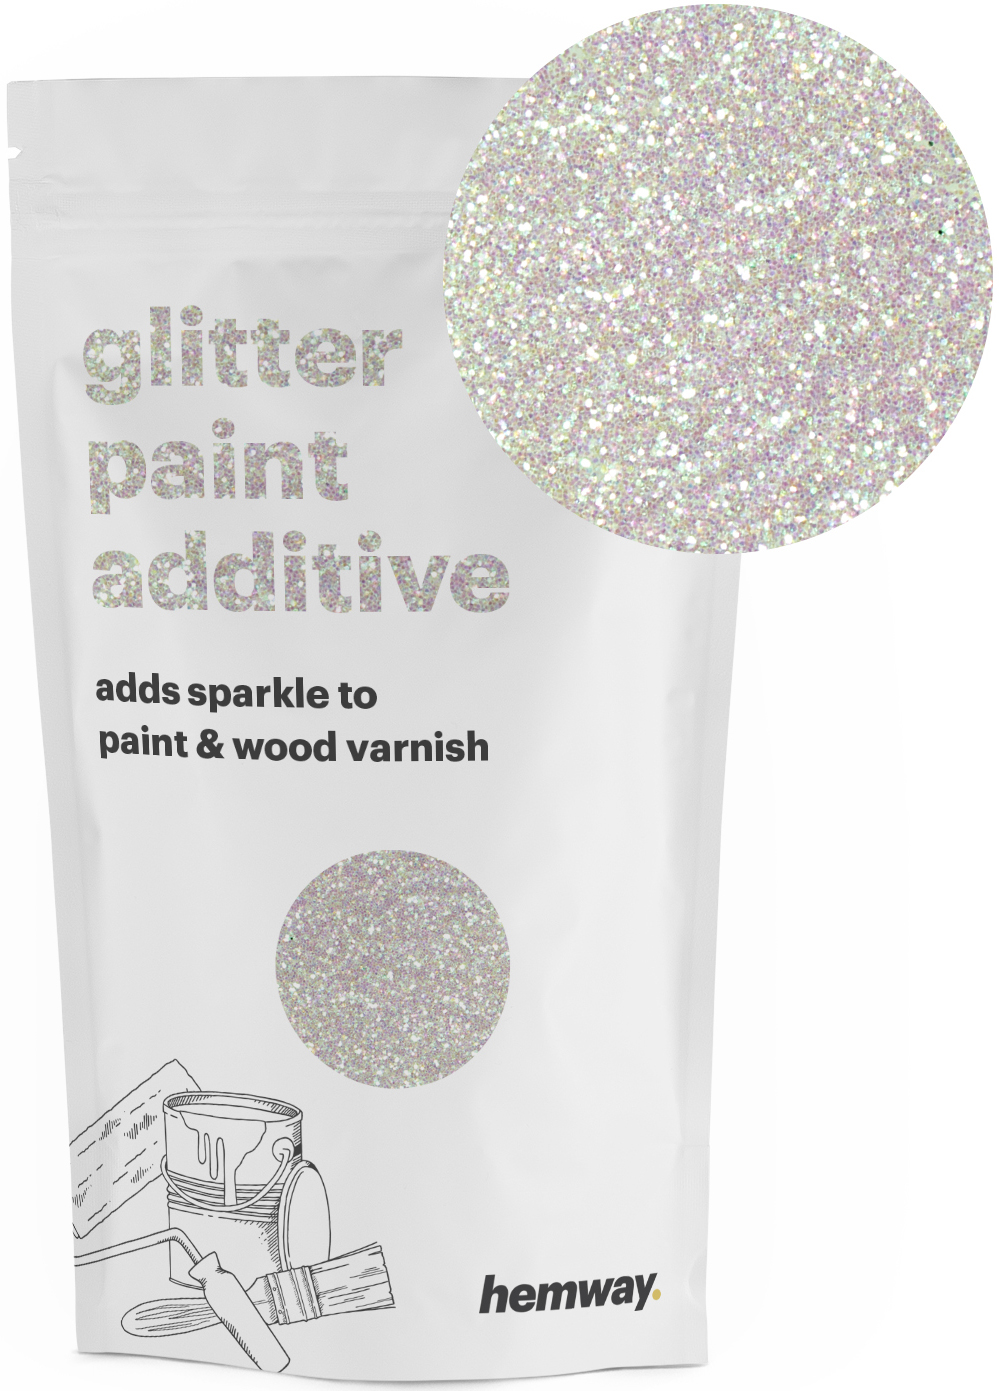 Hemway Glitter Paint Additive for Emulsion Paint, AMAZING 🤩🦄💕👌🏼✨  Glitter Paint Additive for emulsion paint. Make your walls sparkle like ✨✨✨  -->  By Hemway